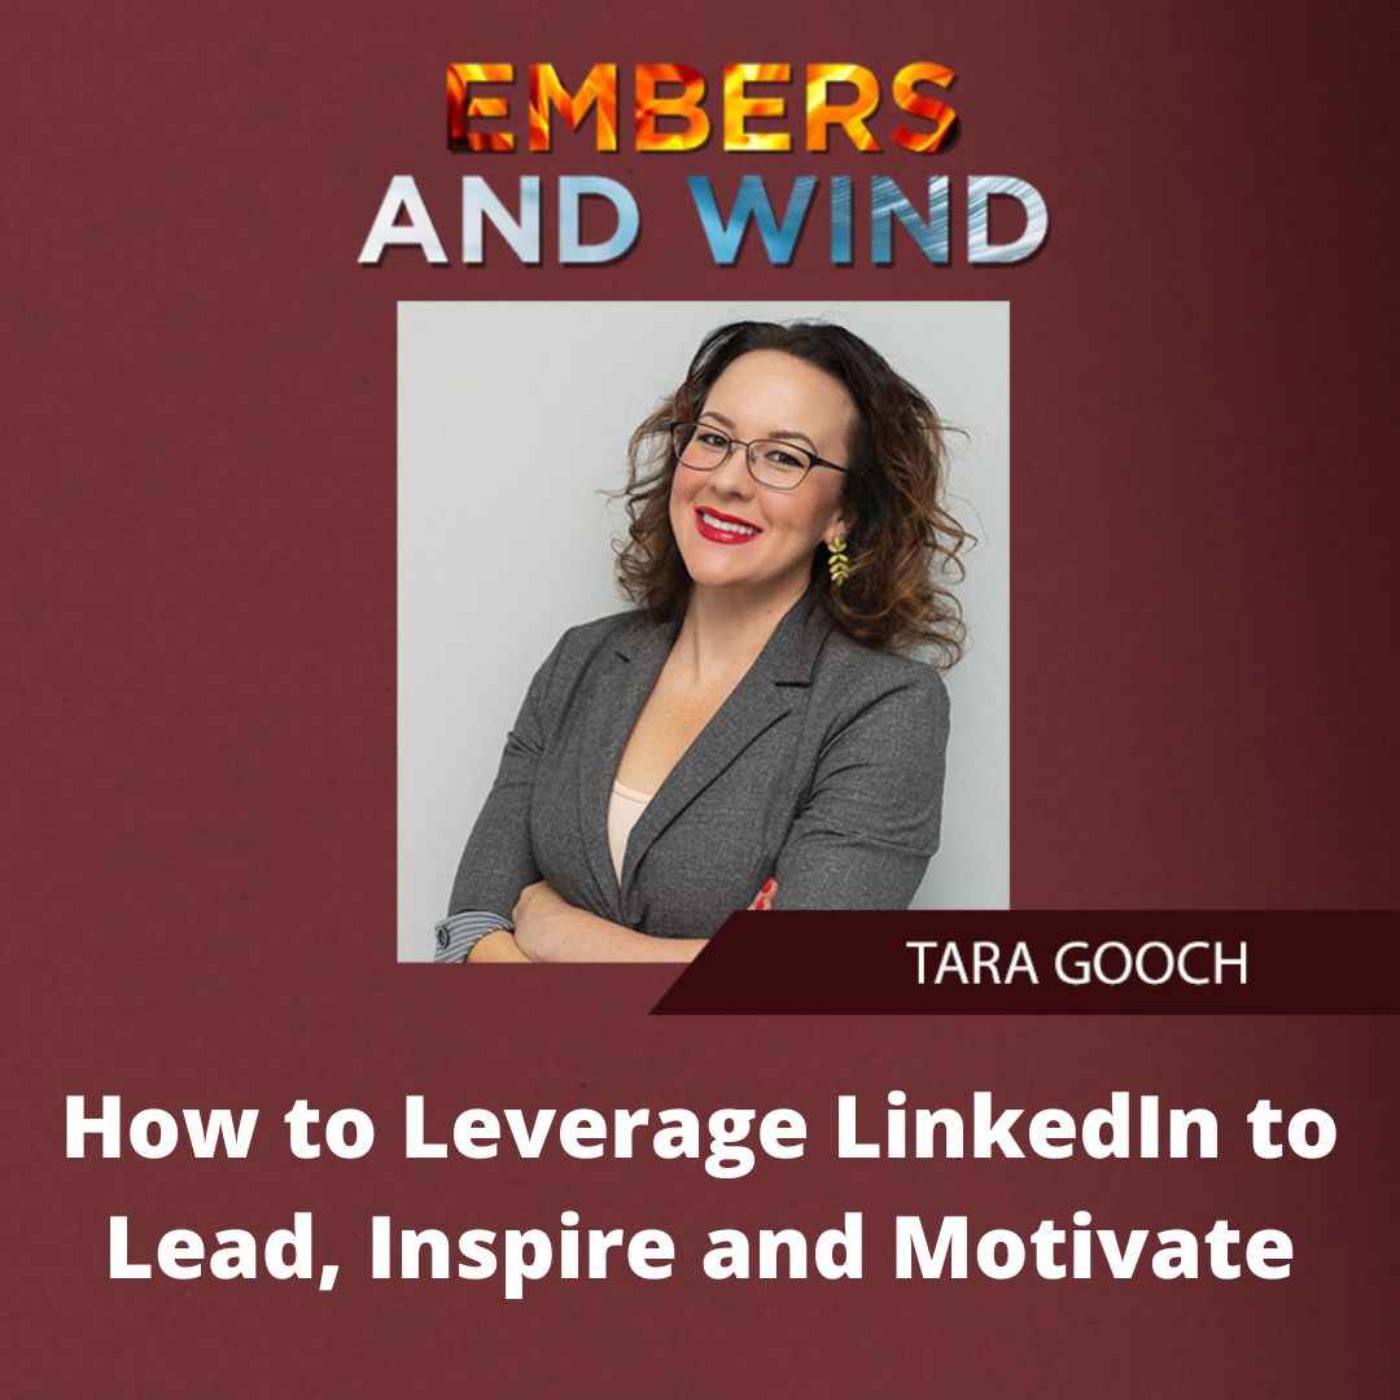 How to Leverage LinkedIn to Lead, Inspire and Motivate